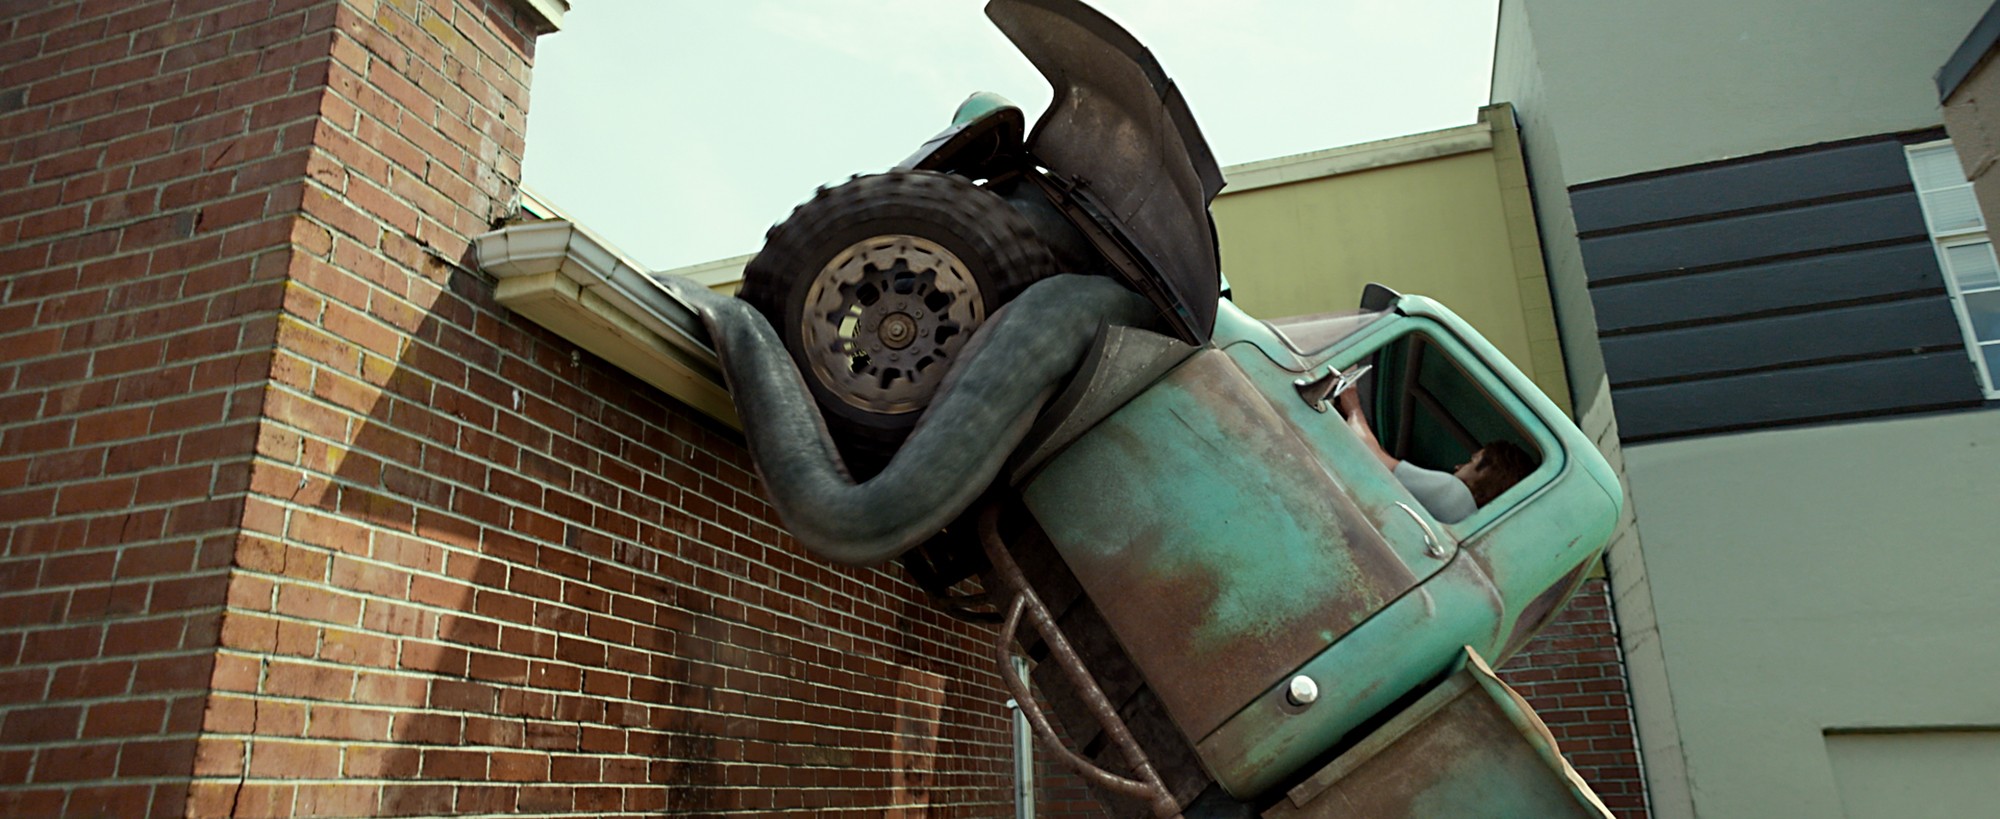 MONSTER TRUCKS is in theaters NOW!! #MonsterTrucks - Mom Does Reviews